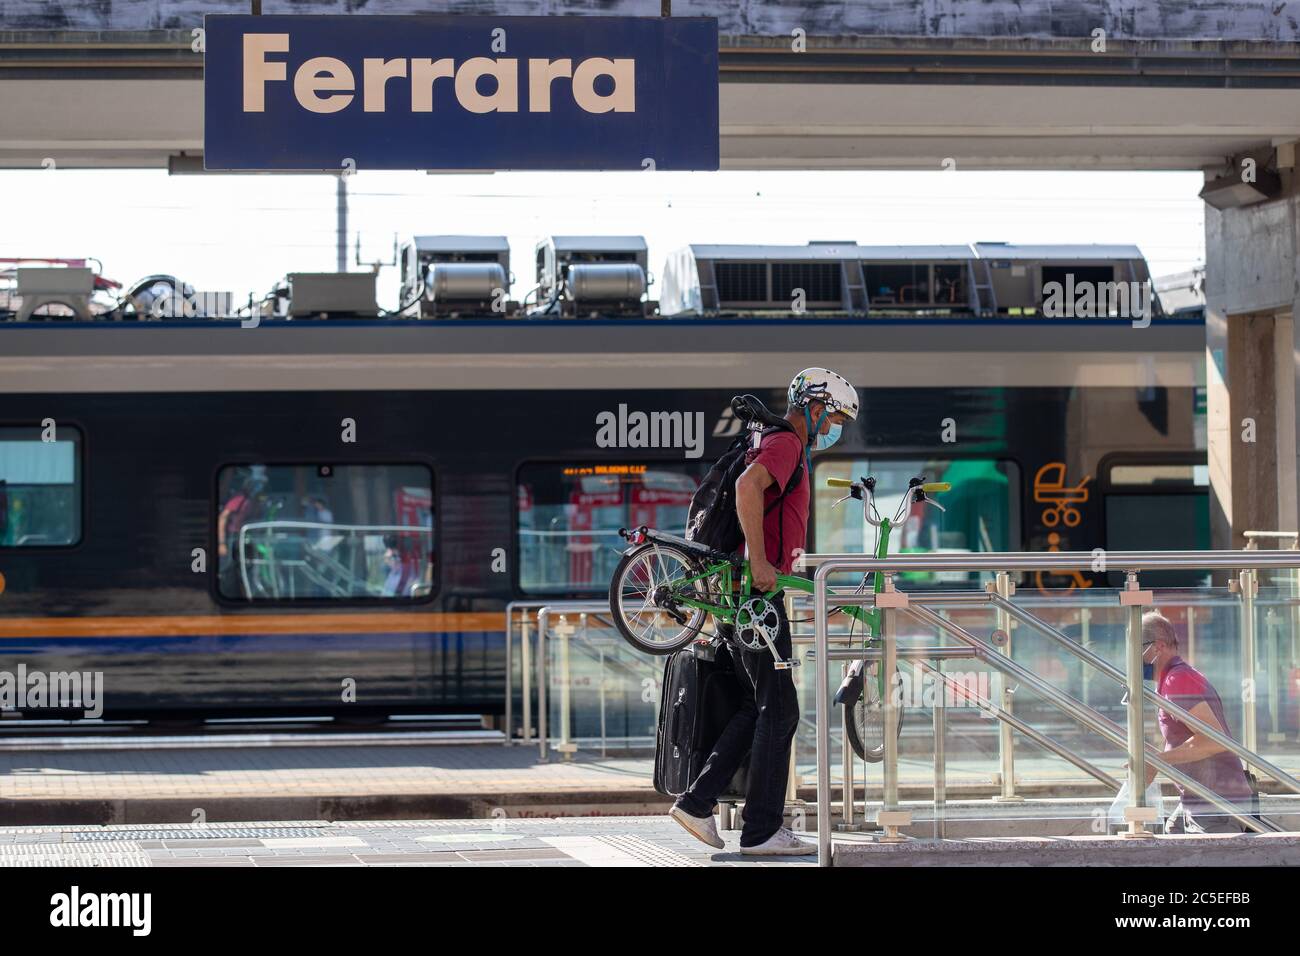 Ferrara, Italy. 2 July, 2020.  A man travels by train carrying his portable and foldable bicycle in Ferrara, Italy.   Credit: Filippo Rubin / Alamy Stock Photo